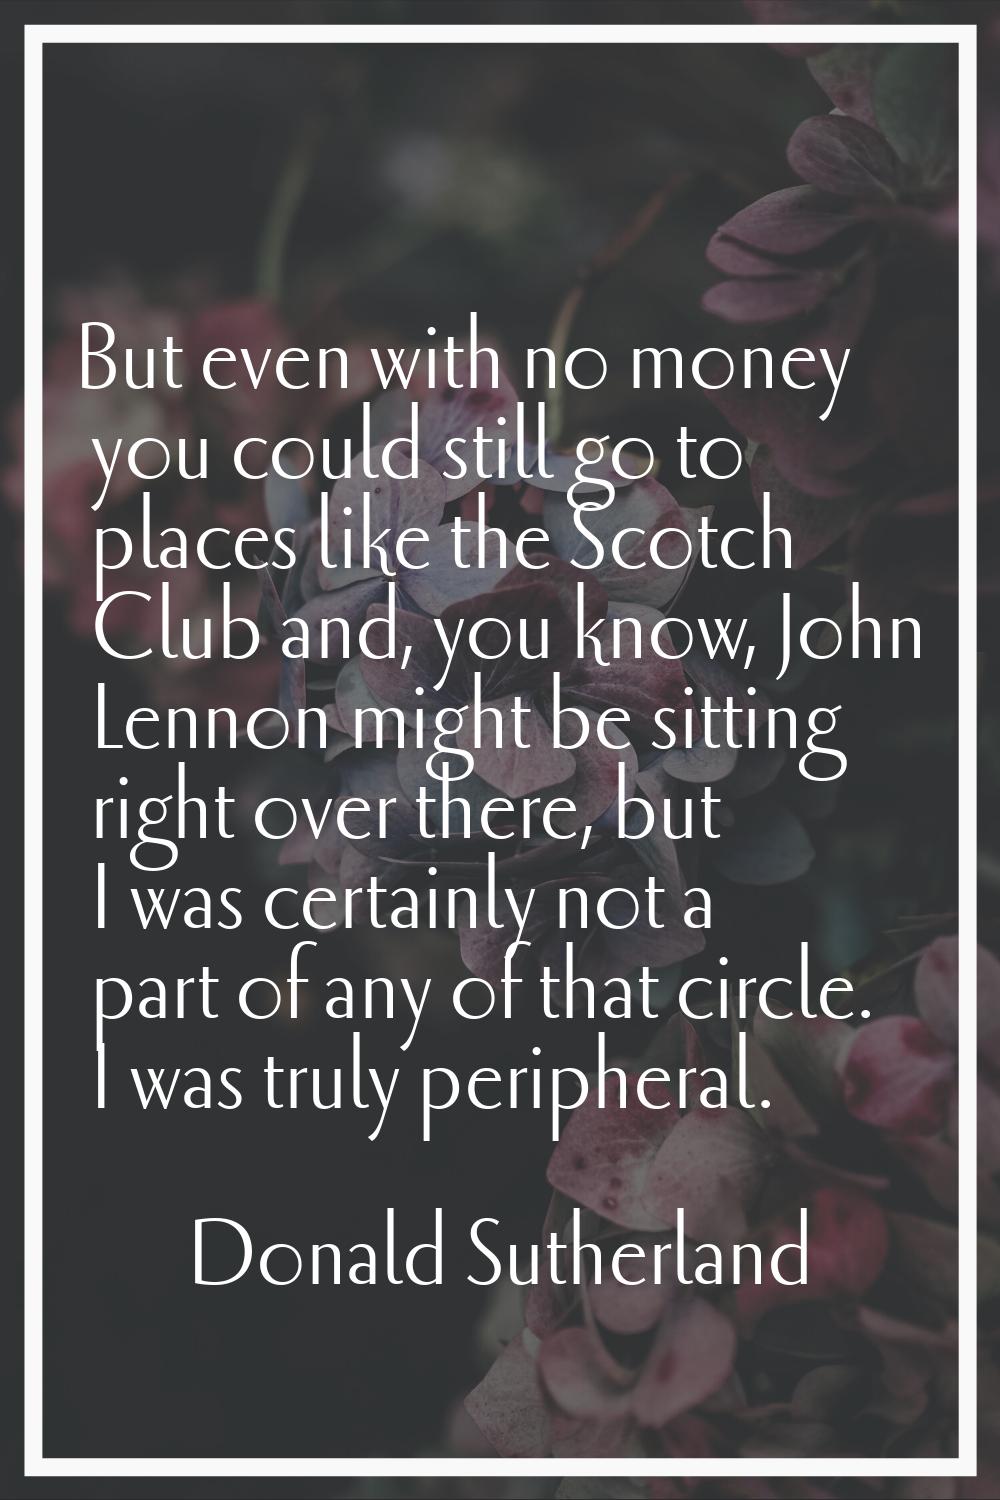 But even with no money you could still go to places like the Scotch Club and, you know, John Lennon